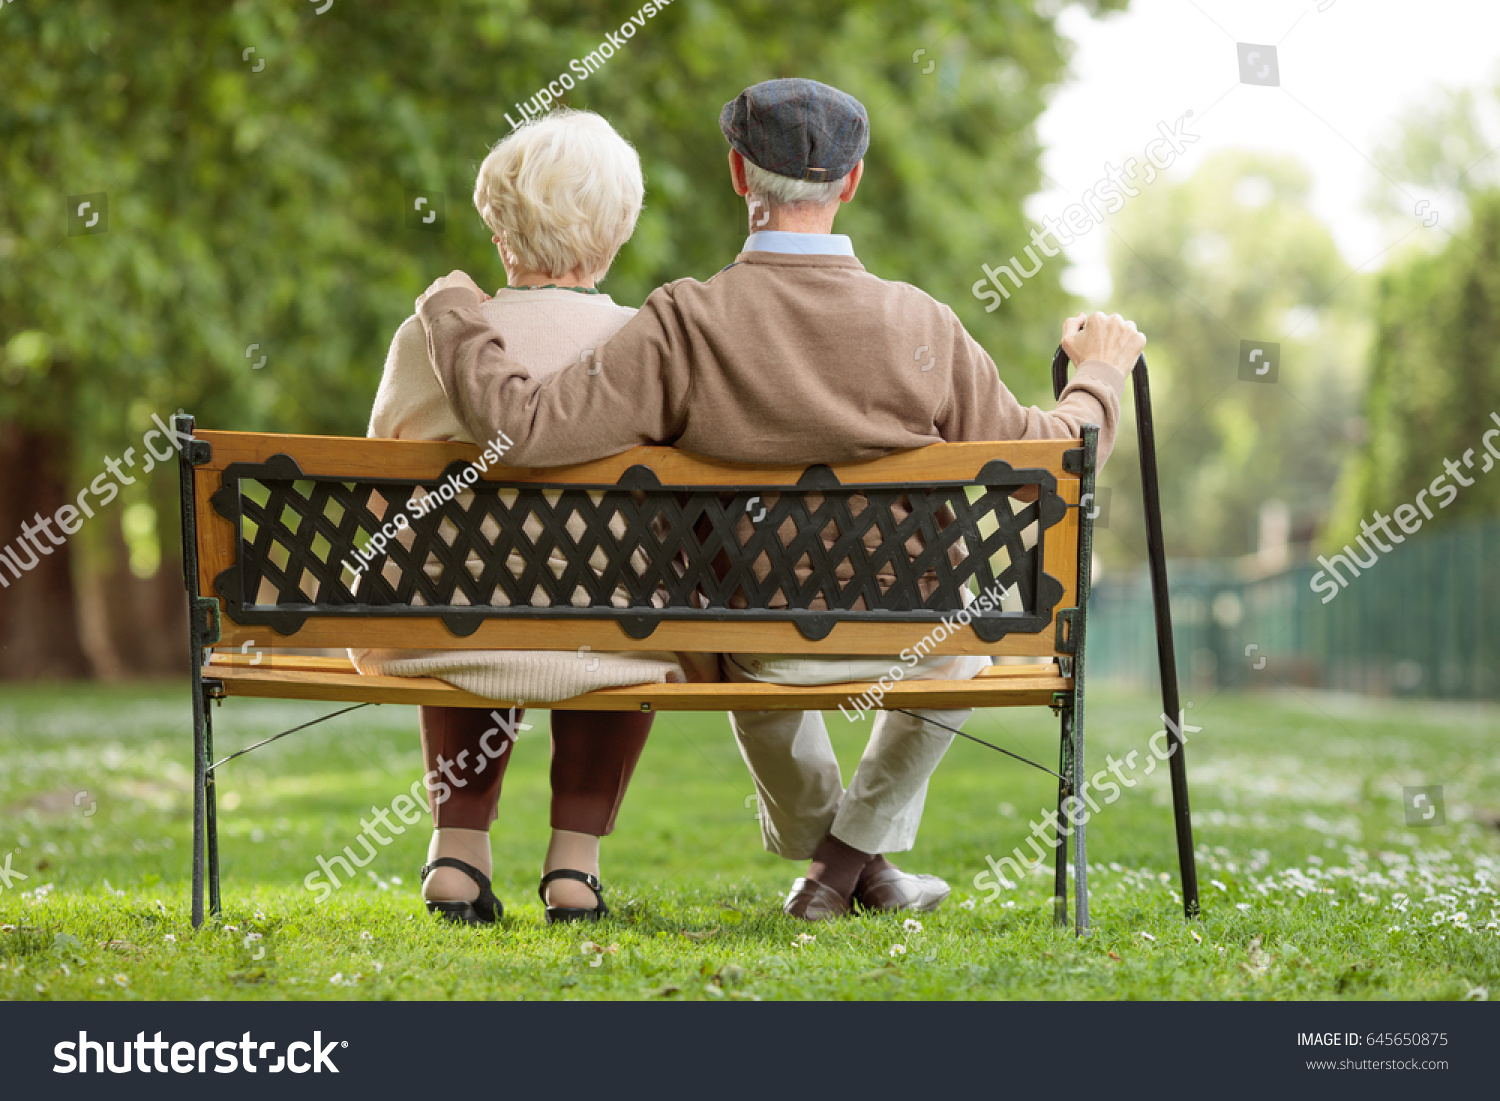 Rear view shot of a senior couple sitting on a wooden bench in the park #645650875